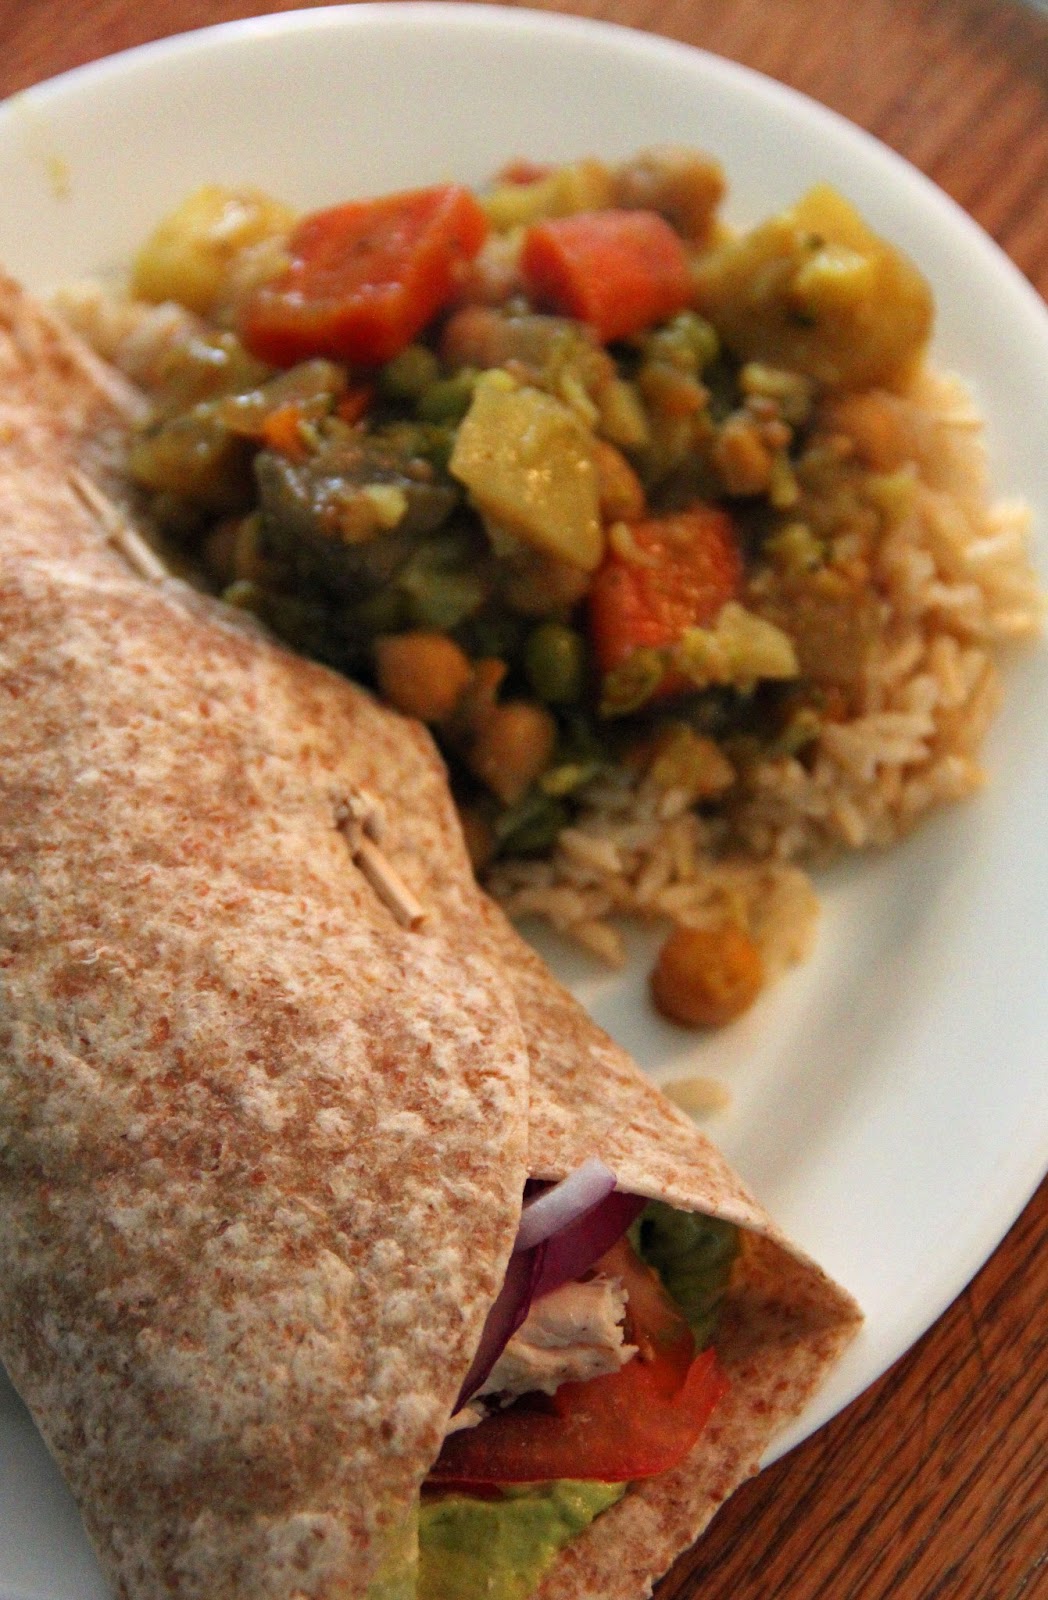 Jo and Sue: Indian Spice Shredded Chicken Wrap With Avocado Curry Sauce